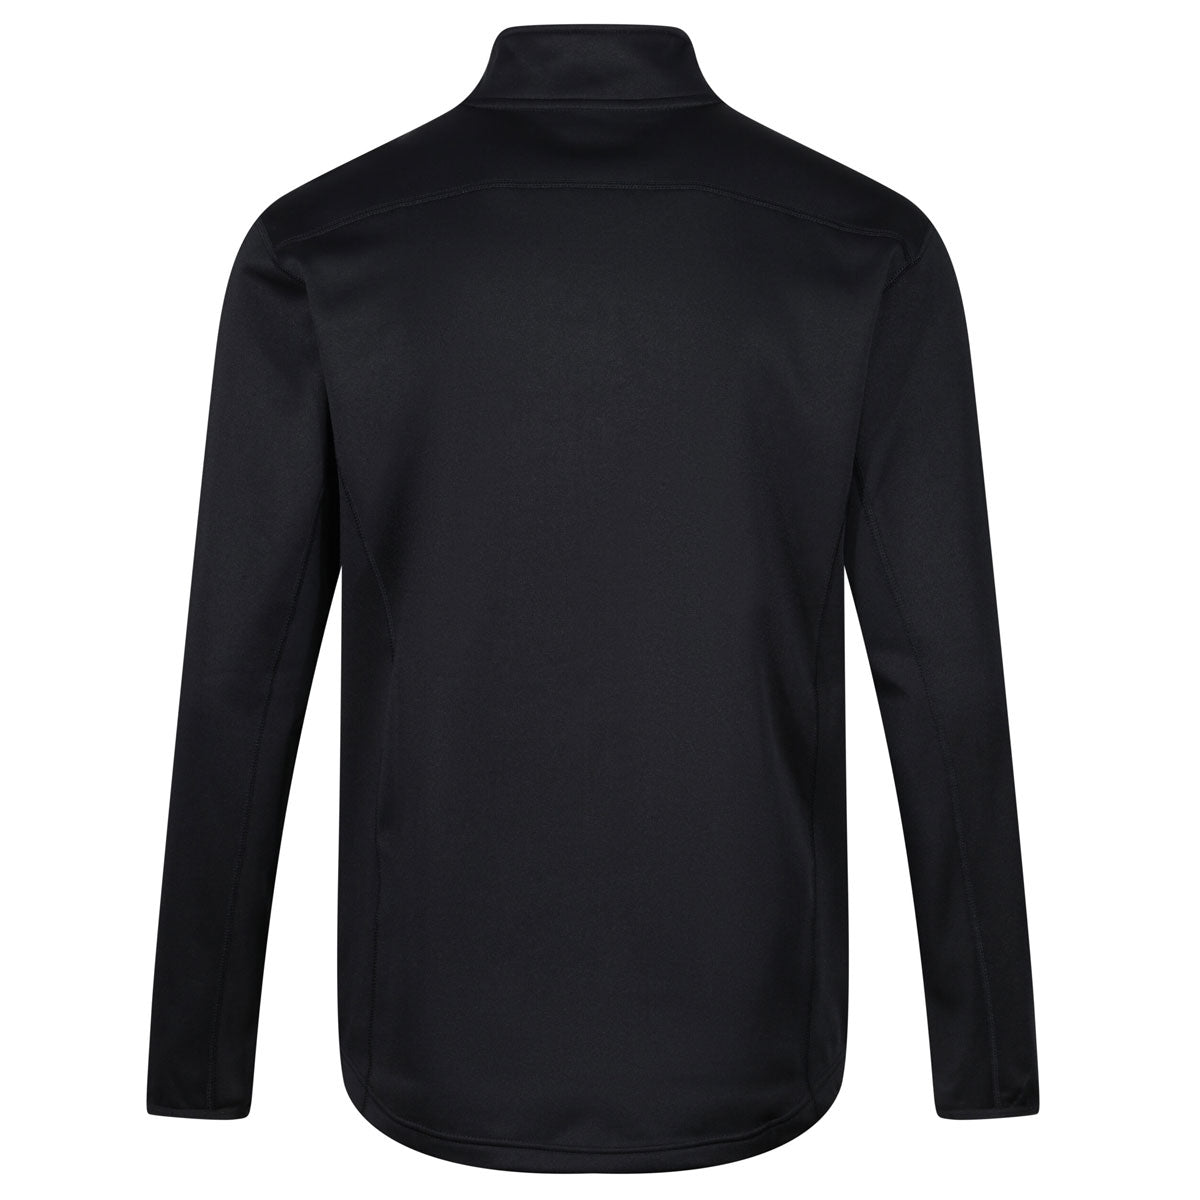 Mc Keever Technical Midlayer 1/4 Zip Top - Youth - Black